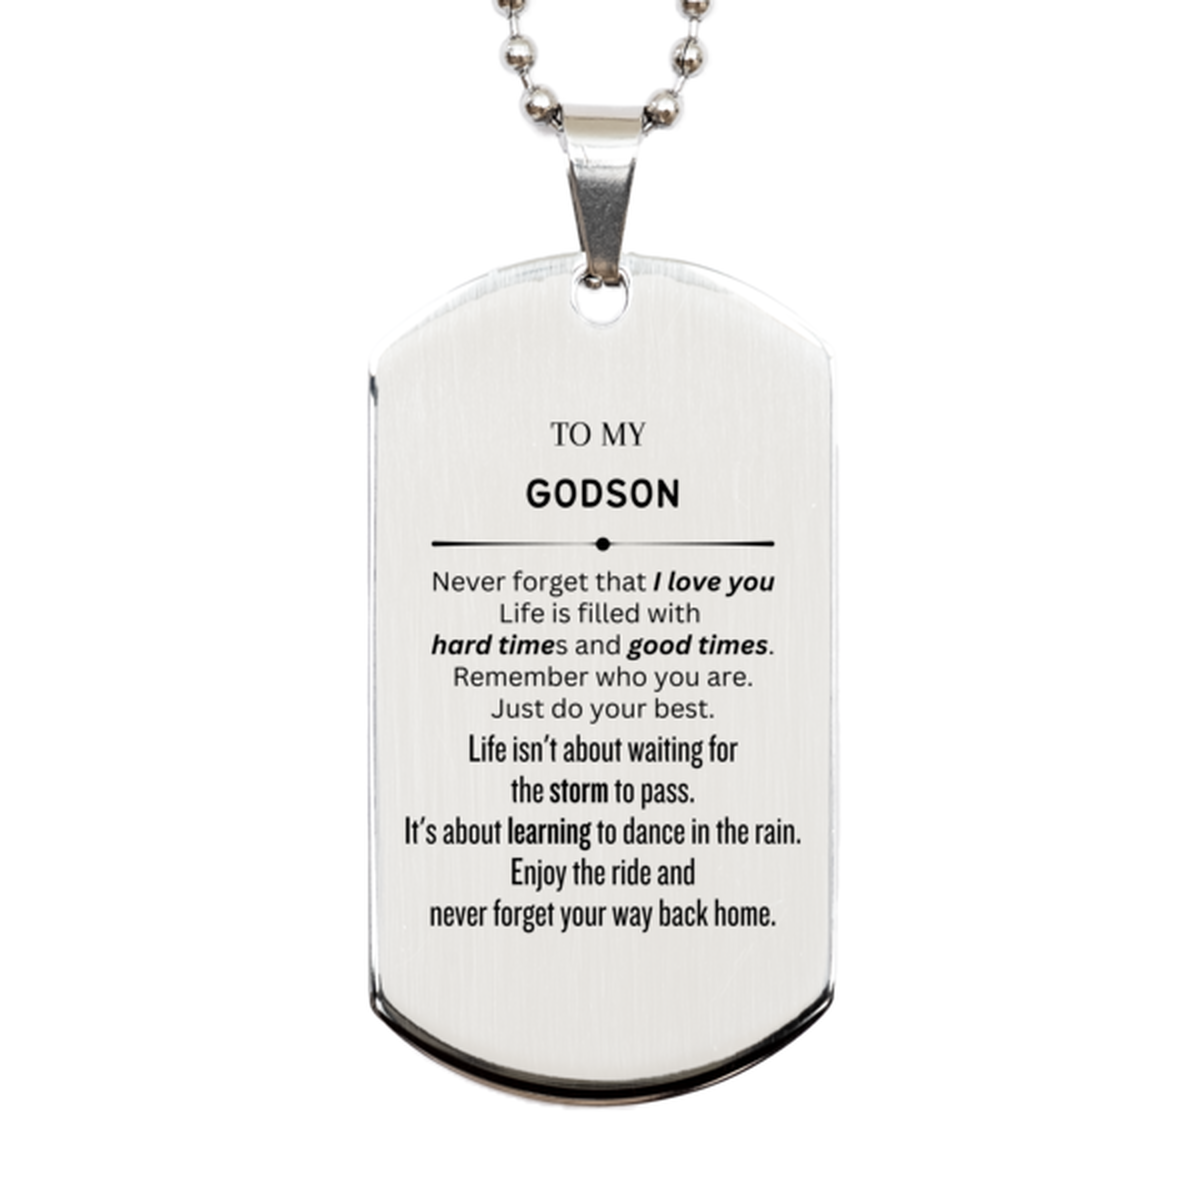 Christmas Godson Silver Dog Tag Gifts, To My Godson Birthday Thank You Gifts For Godson, Graduation Unique Gifts For Godson To My Godson Never forget that I love you life is filled with hard times and good times. Remember who you are. Just do your best